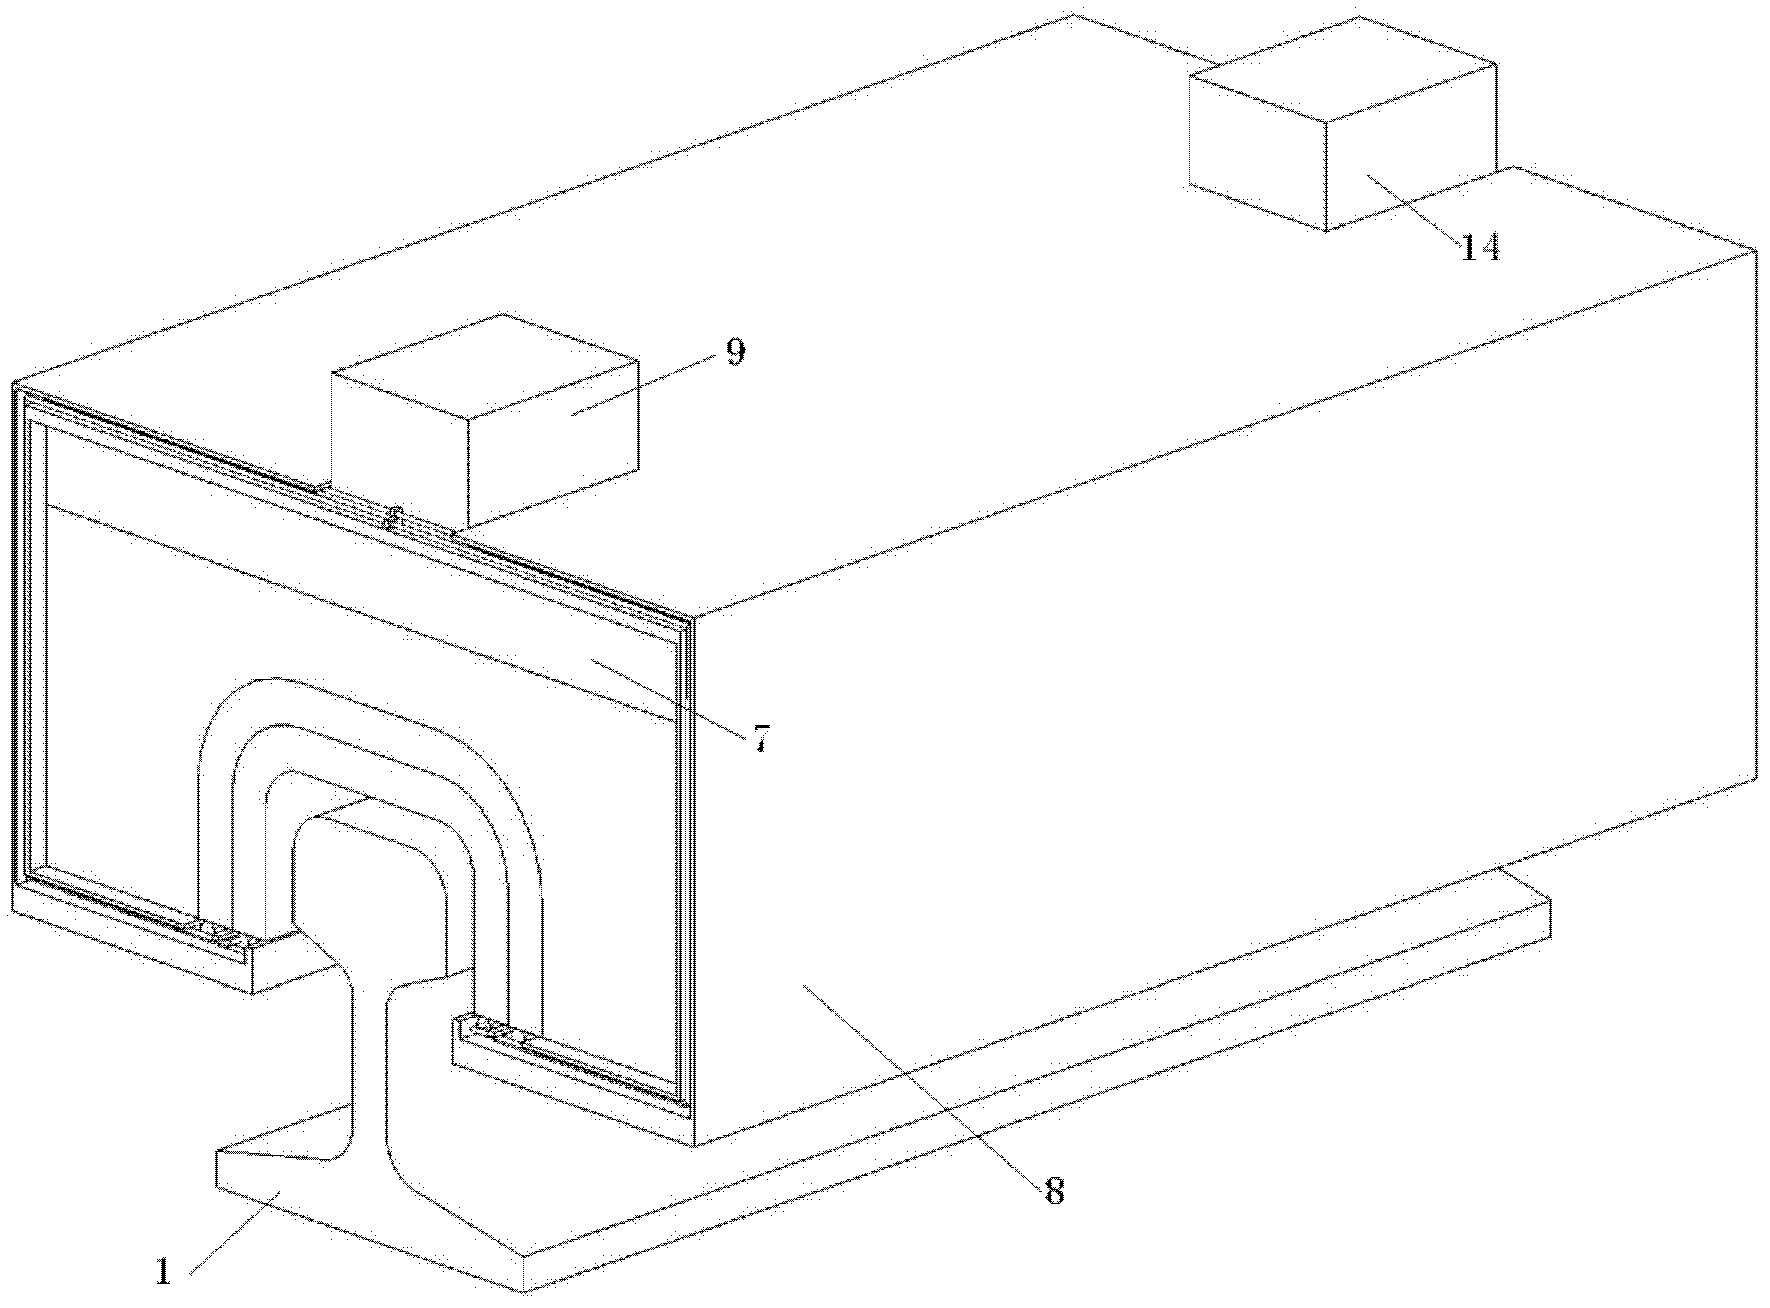 Rail destruction detection device and method based on magnetostriction and longitudinal ultrasonic guided wave